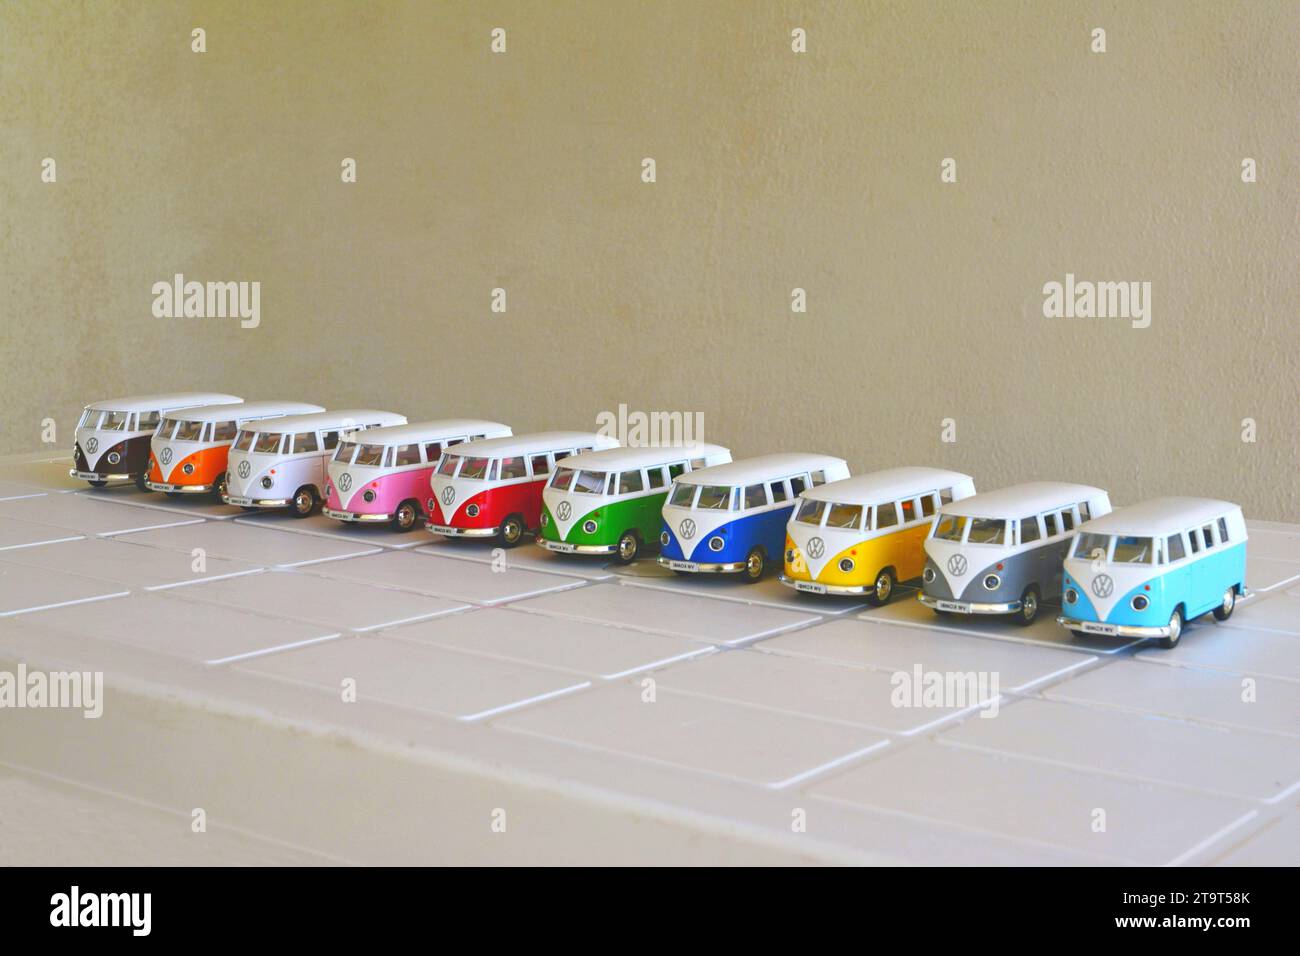 Van. Diecast, Iron miniature of vans of various colors, Brazil, South America, side view, selective focus on white table on white background, lined u Stock Photo